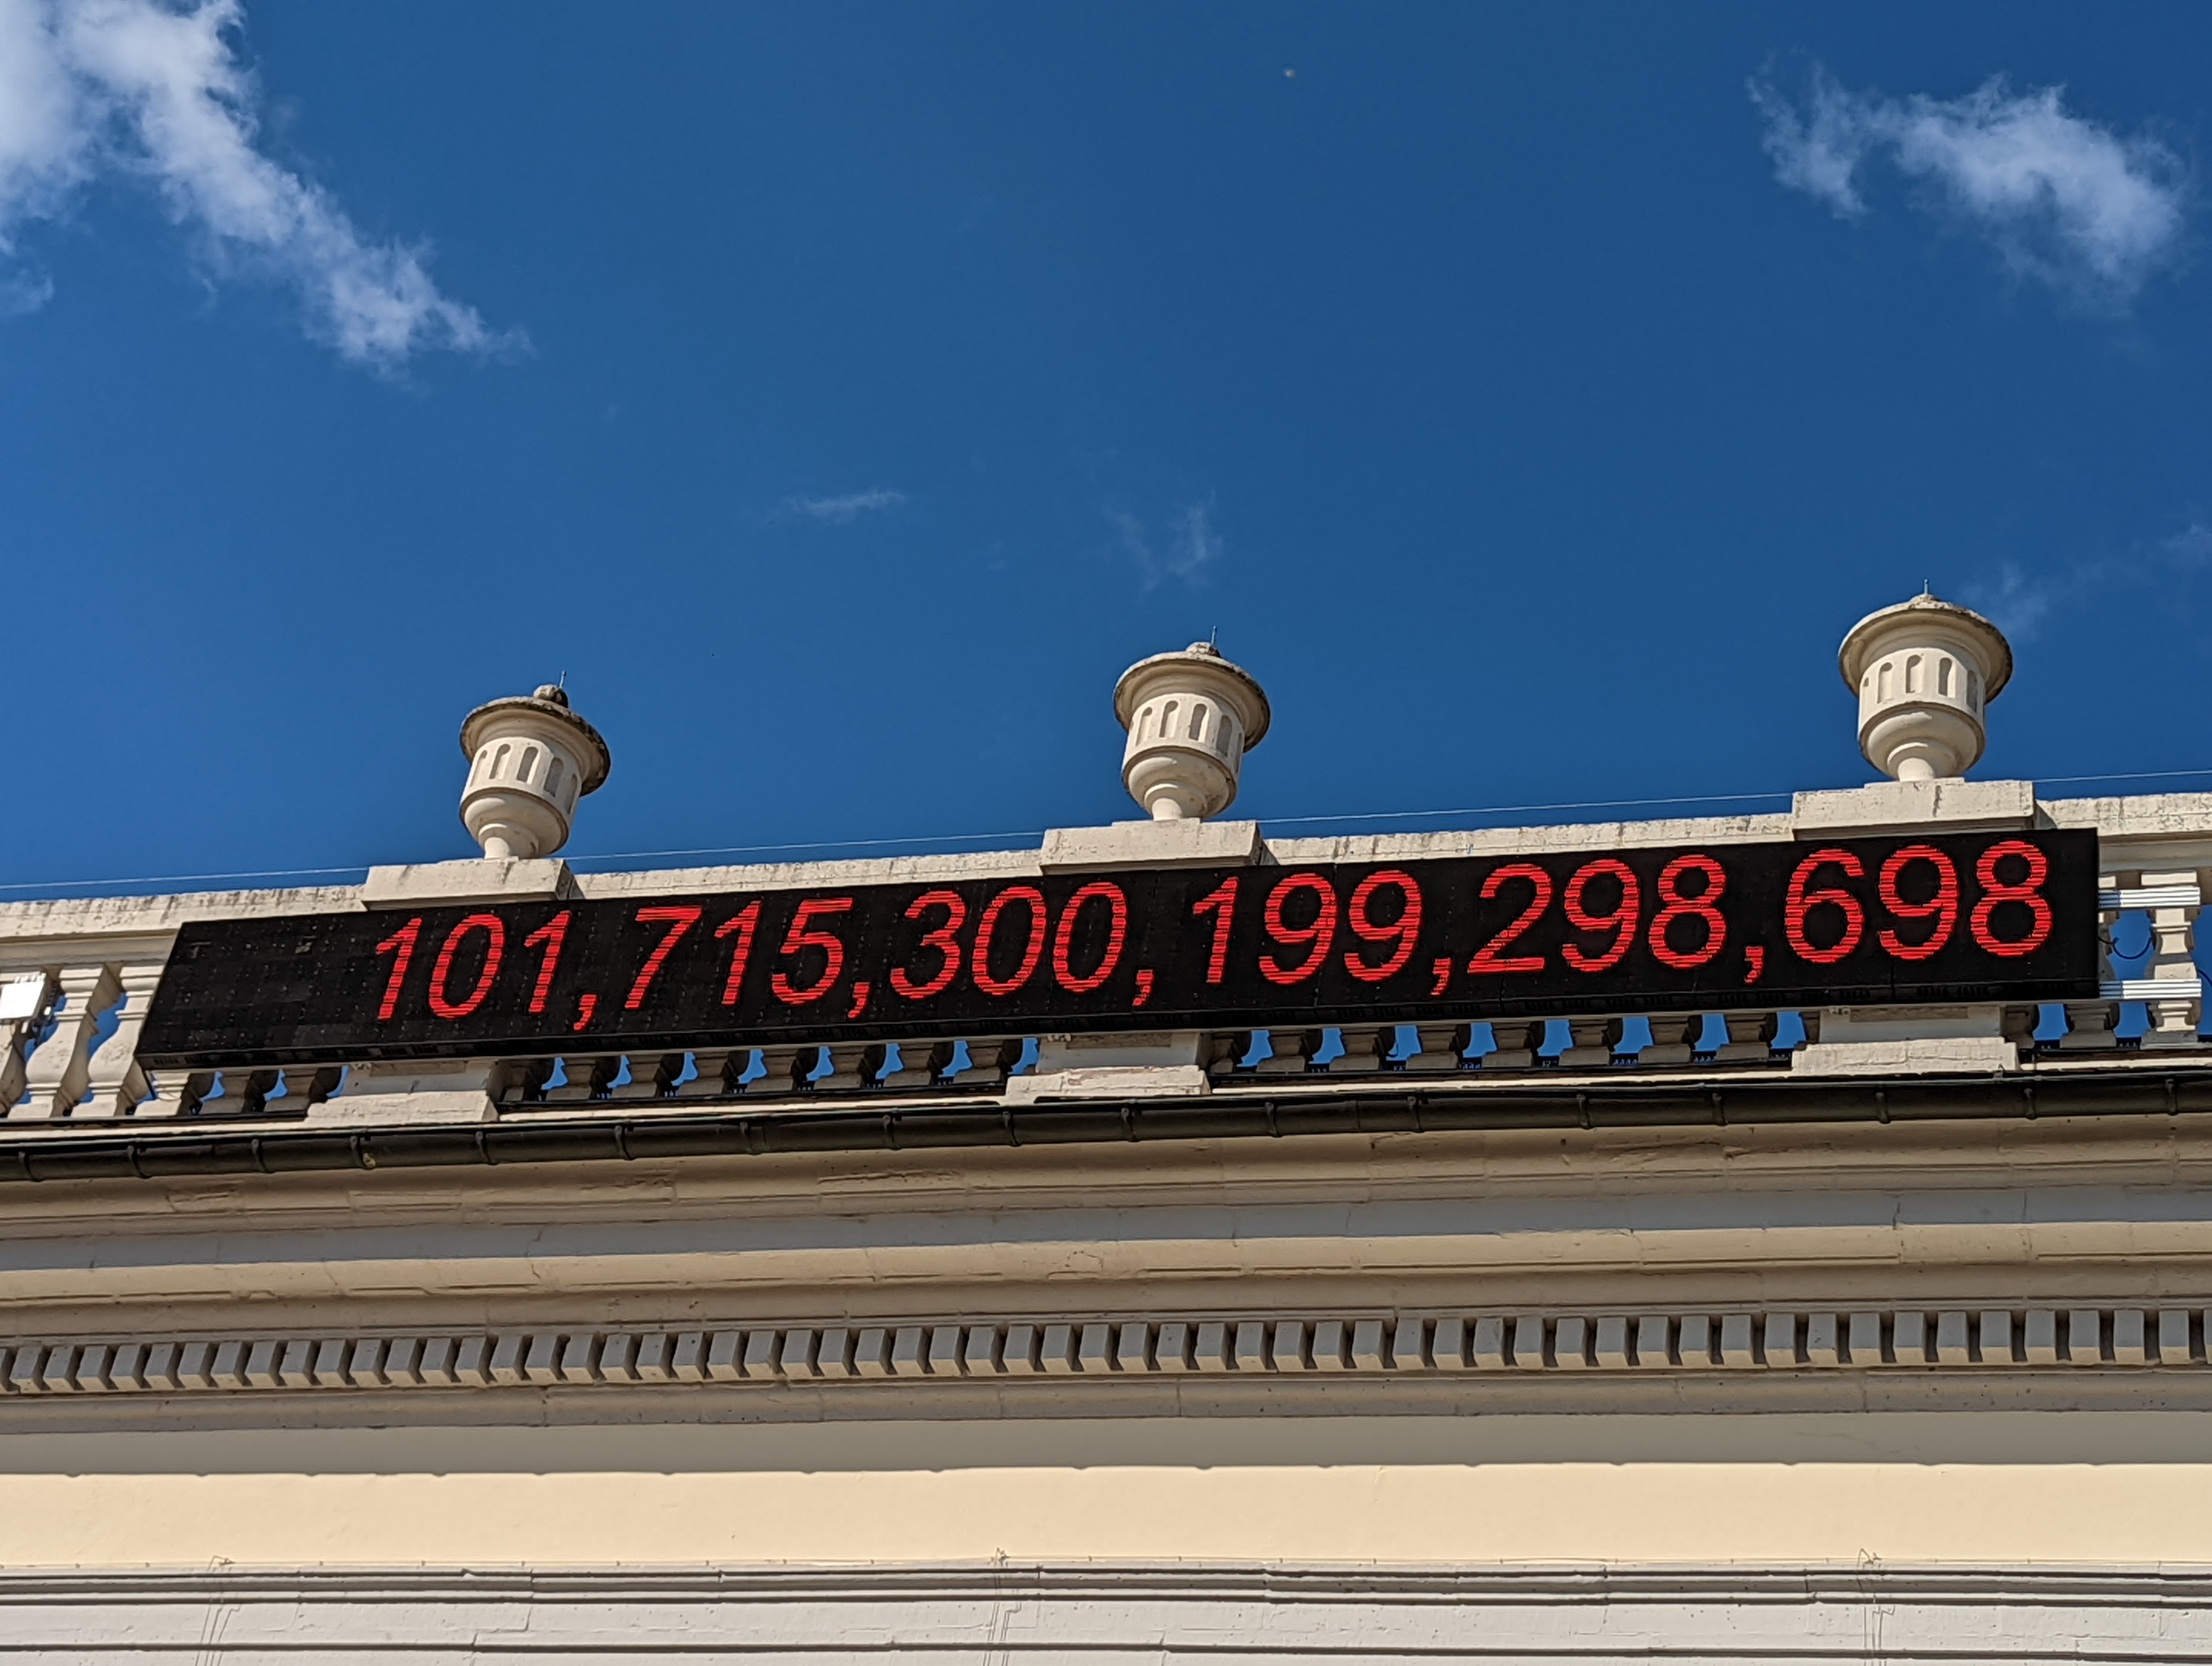 A large digital ticker shows the number 101,715,300,199,298,698 in red over a black background installed on a gallery rooftop.